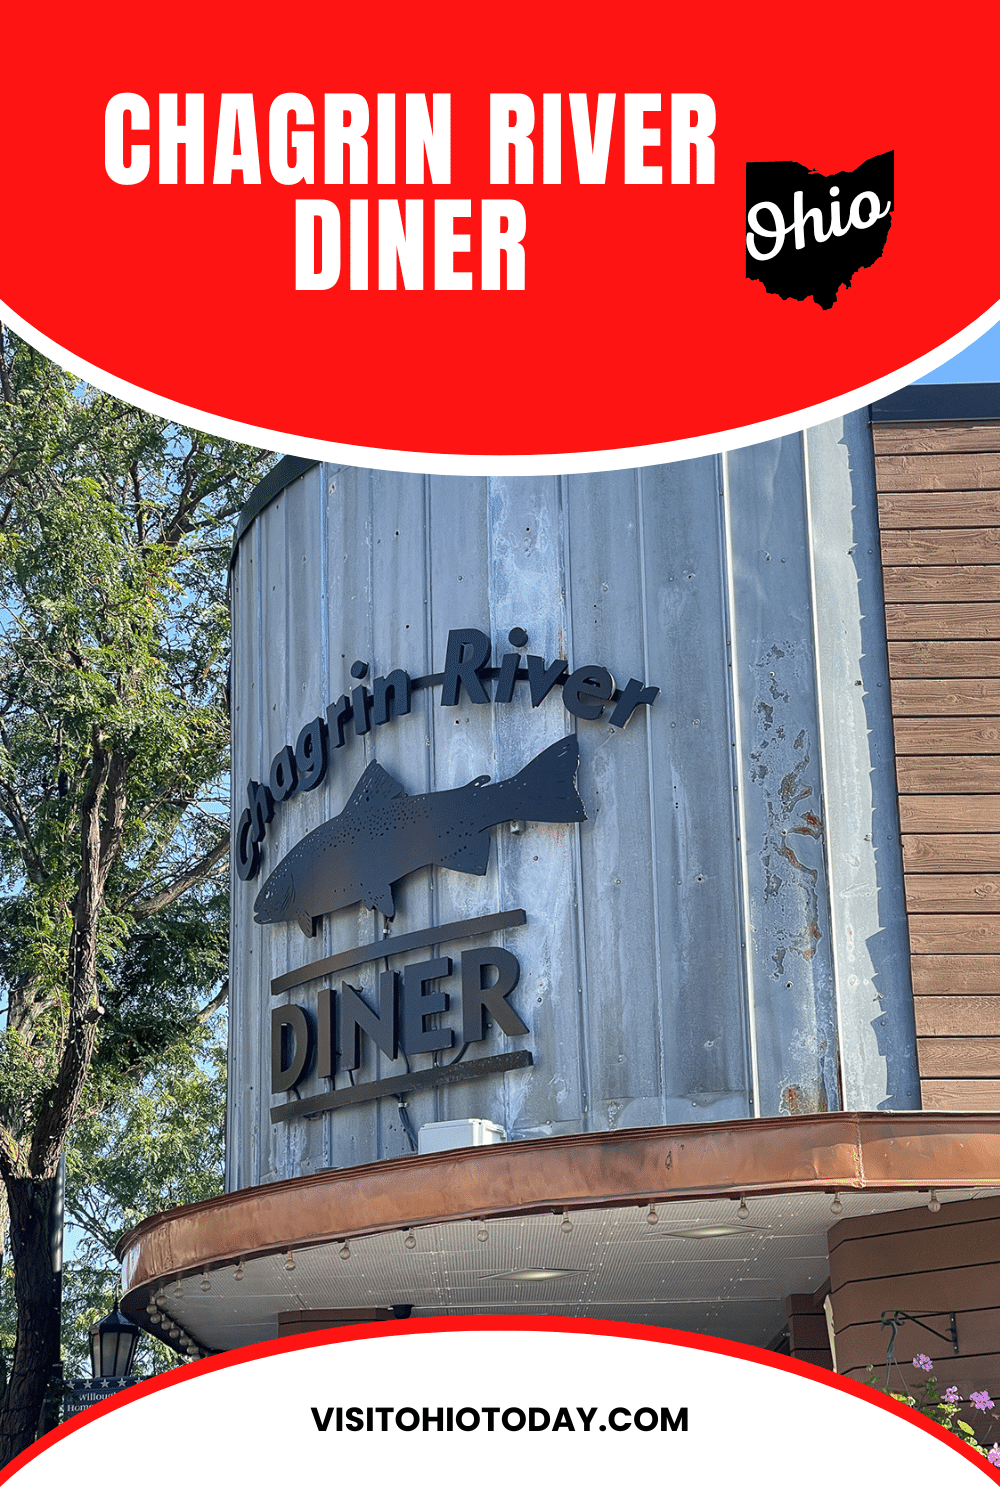 Chagrin River Diner is the top rated diner in Lake County, located in downtown Willoughby, on the shores of Lake Erie. Gluten-free and vegetarian meals are available.